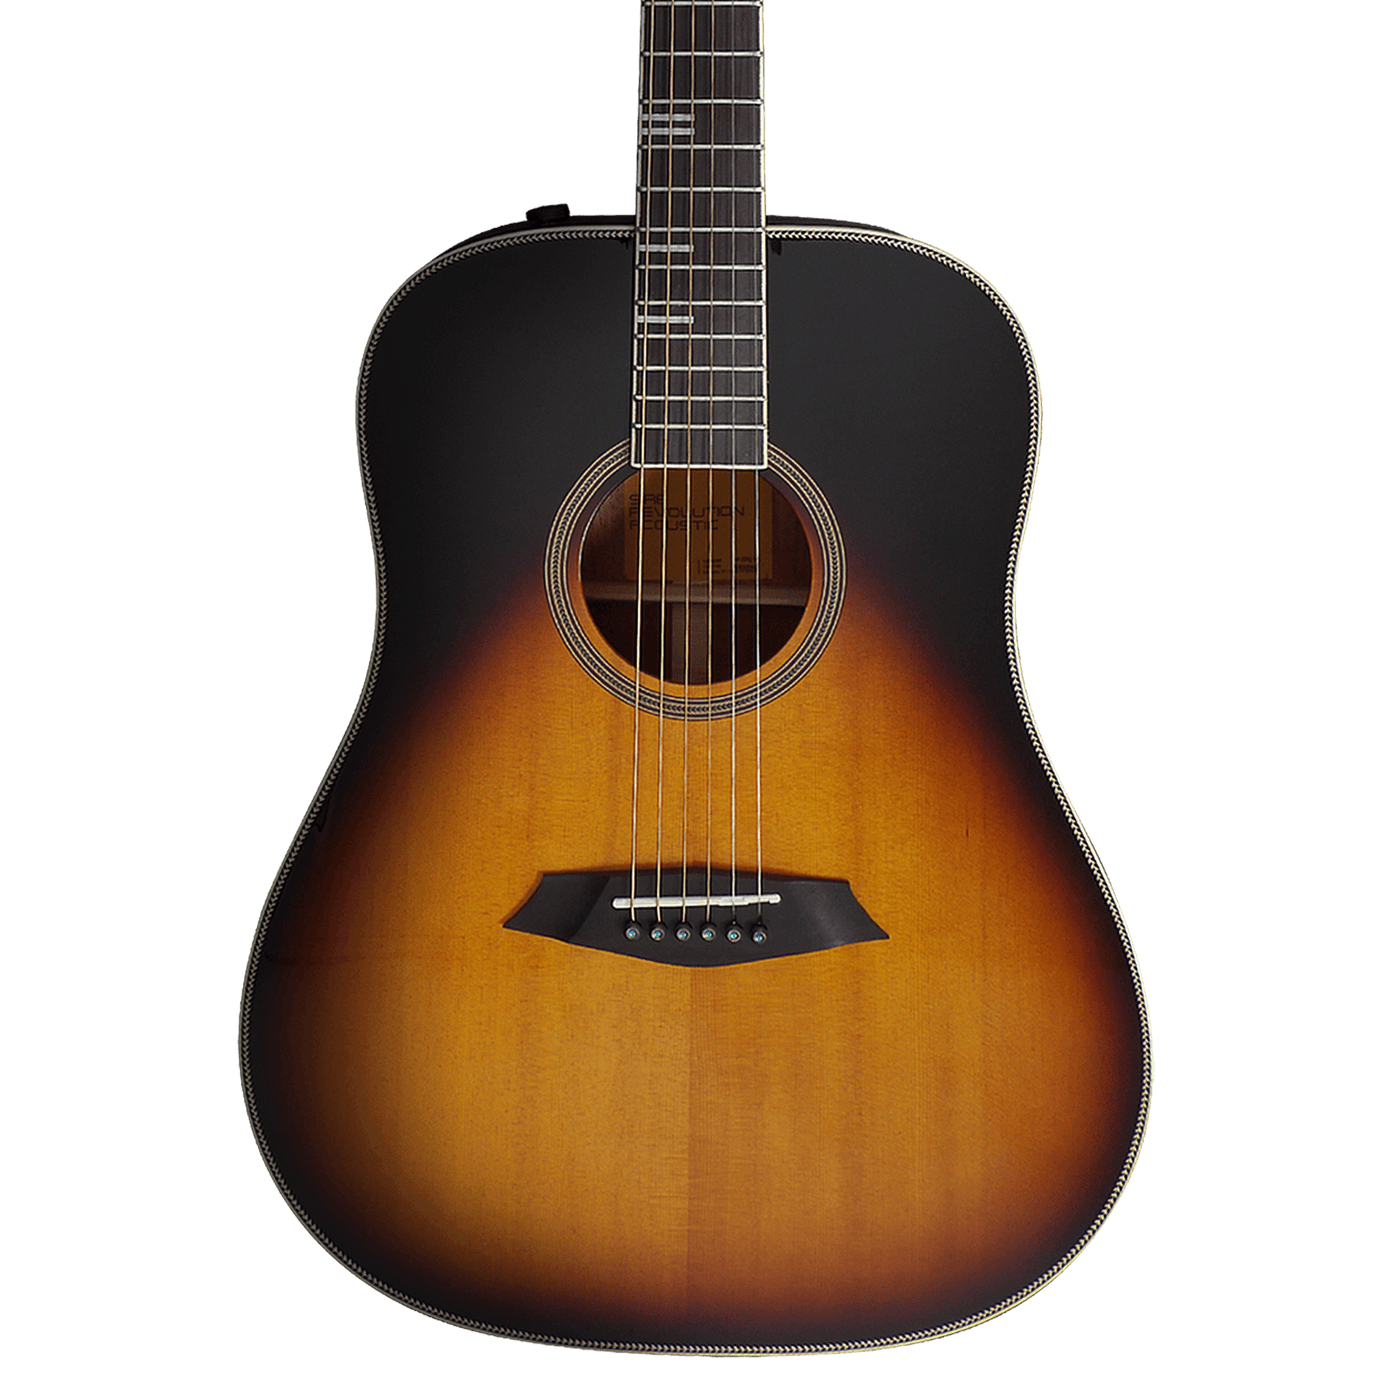 Sire A4-D Vintage Sunburst - $799990 - Gearhub - The upgraded Sire acoustic guitar is brimming with design and features meeting the quality standard of Larry Carlton. The A4 has two body shapes - Dreadnought and Grand Auditorium. More than the comfort from the rolled fretboard edges, the added solid Mahogany back plate makes the acoustic guitar more worth than its value. Cuerpo • Modelo: Larry Carlton A4-D (Dreadnought)• Top: Roasted Solid Spruce• Sides: Mahogany• Top: Solid Mahogany • Terminación: Polyuret